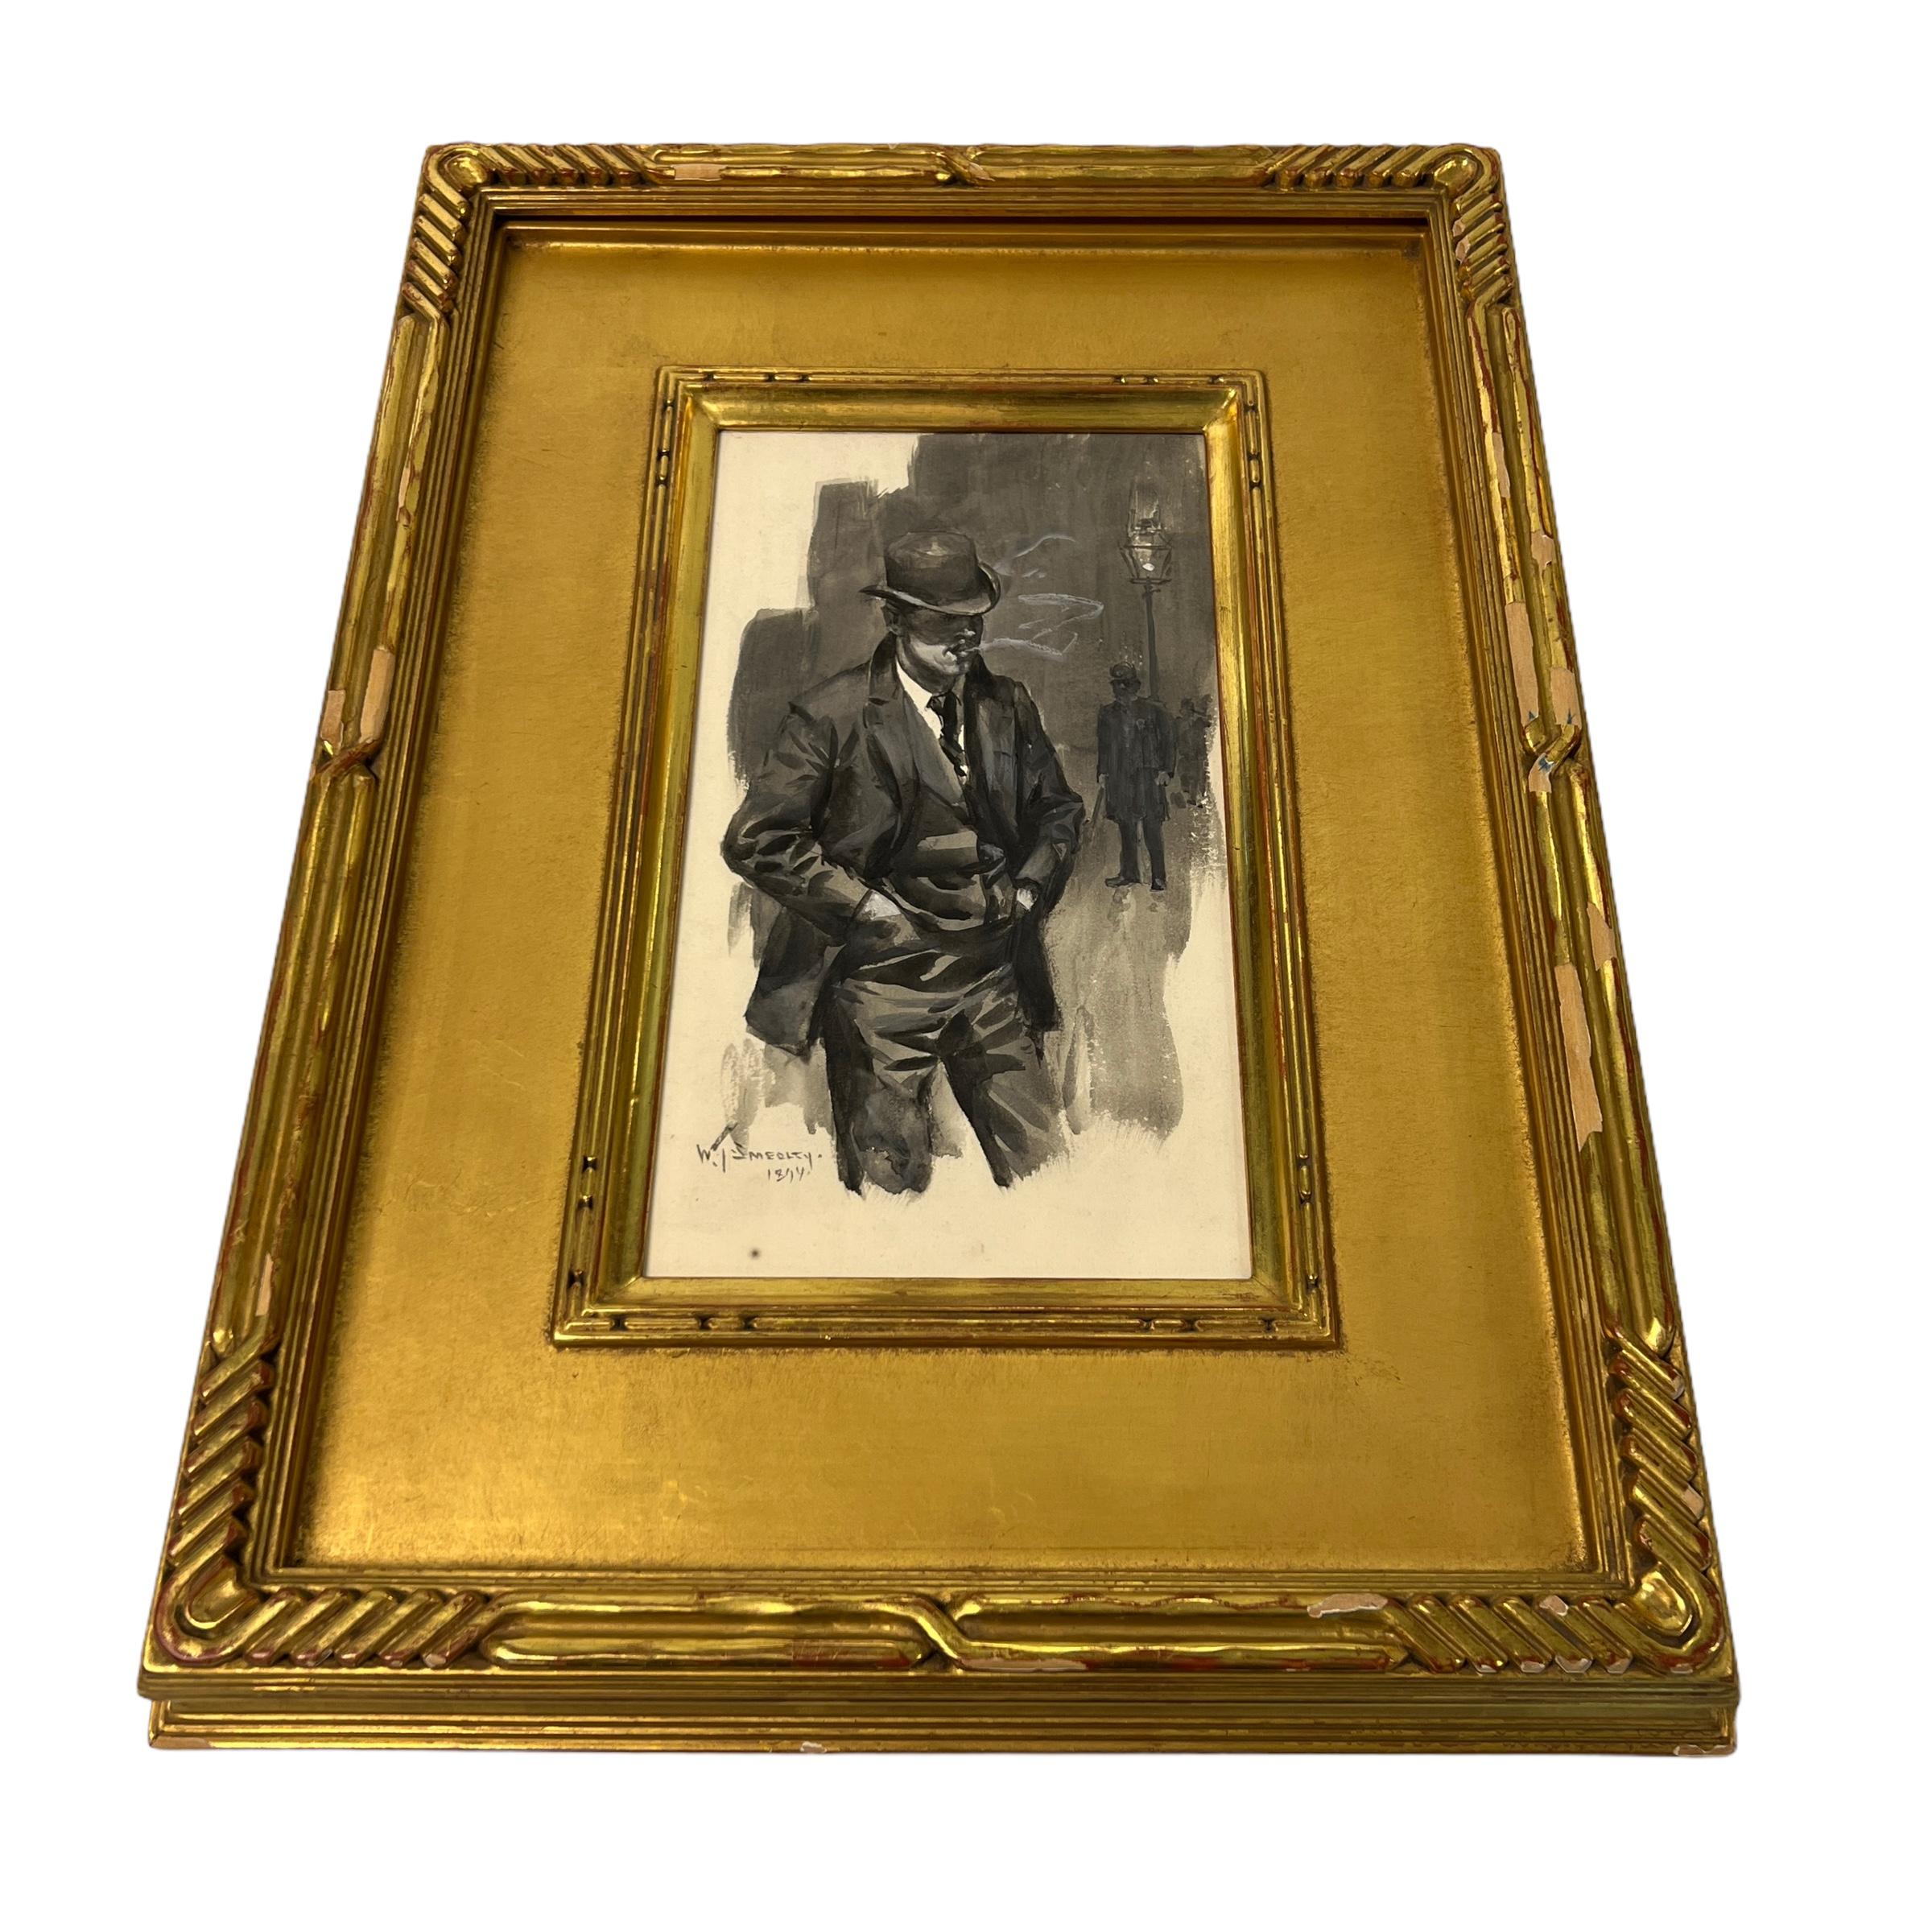 Our exceptional watercolor on paper by the American painter and illustrator, William Thomas Smedley (1858-1920), depicts a distinguished gentleman smoker standing beside a street lamp. Signed and dated 1894. Mounted in period giltwood frame